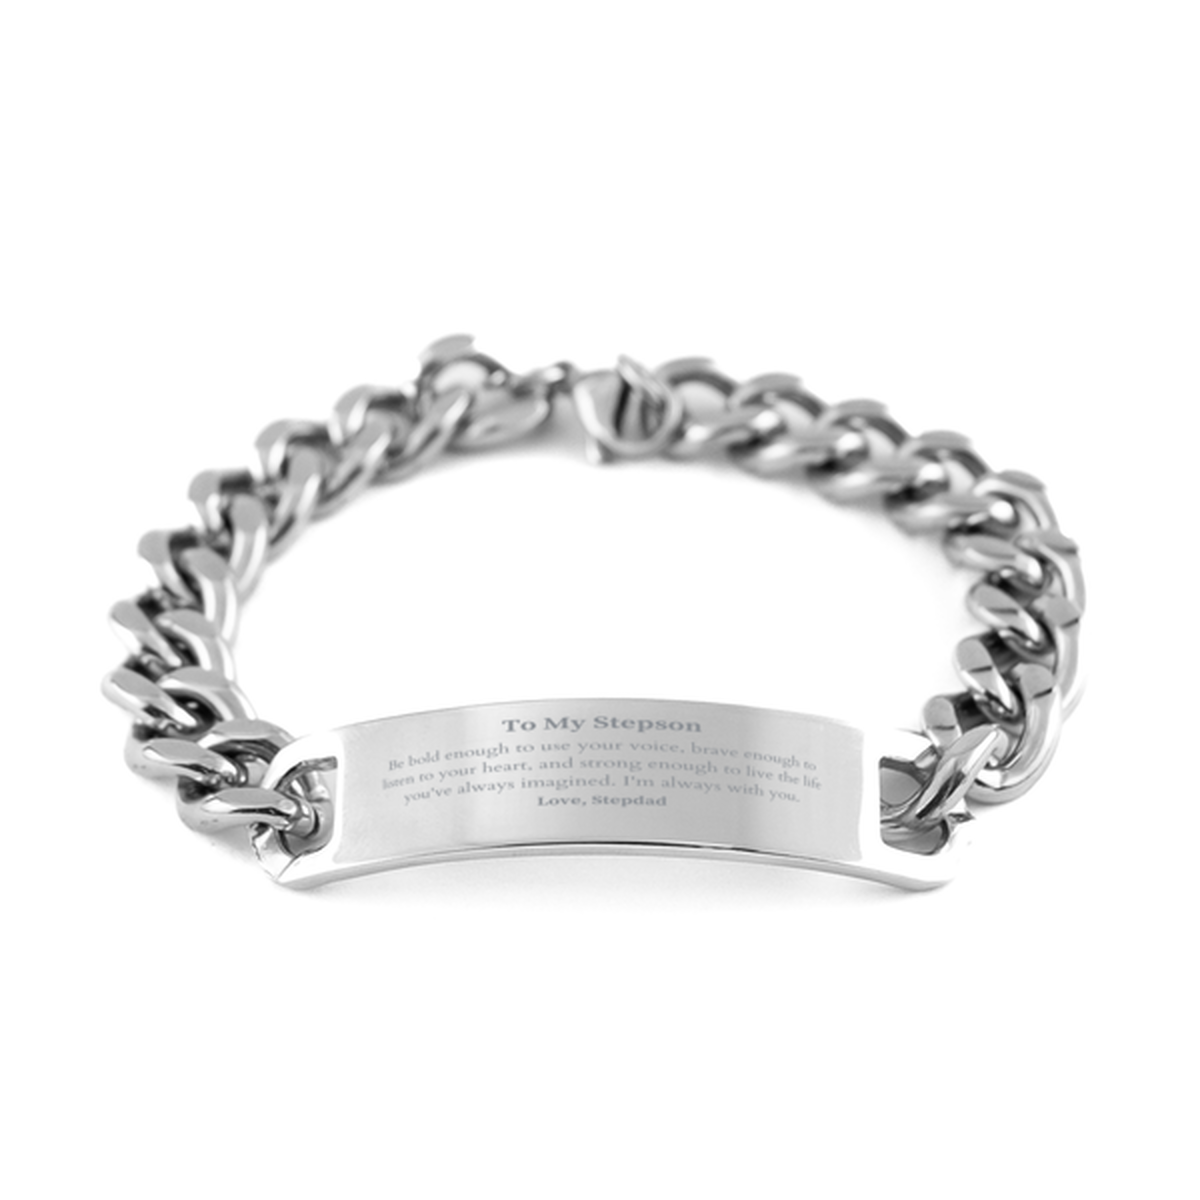 Keepsake Stepson Cuban Chain Stainless Steel Bracelet Gift Idea Graduation Christmas Birthday Stepson from Stepdad, Stepson Be bold enough to use your voice, brave enough to listen to your heart. Love, Stepdad